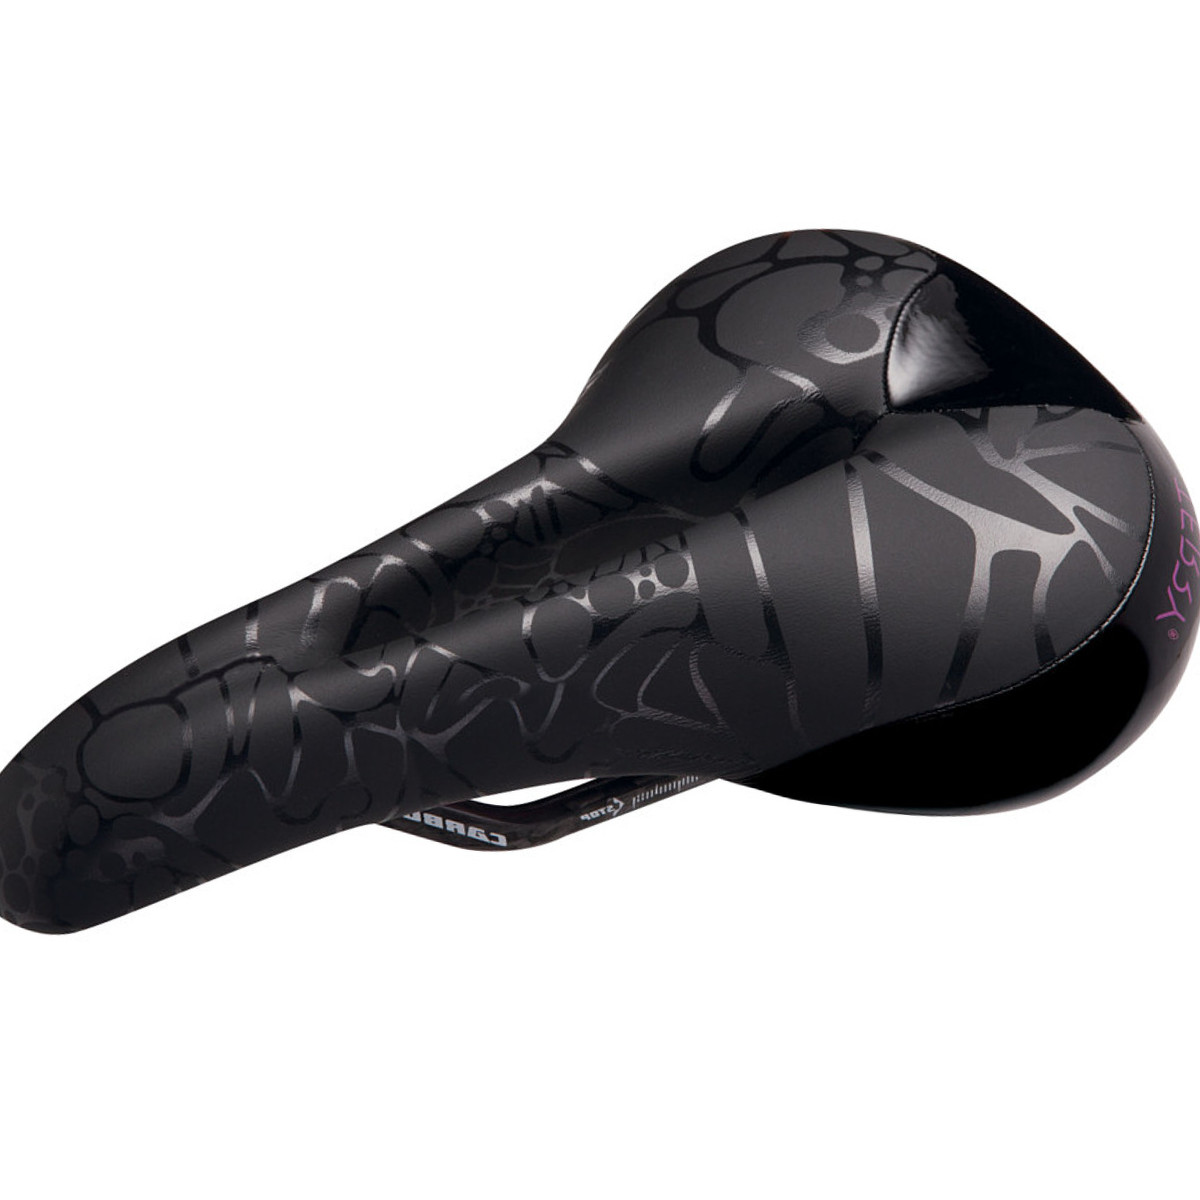 Terry Bicycles Butterfly Carbon Saddle - Women's